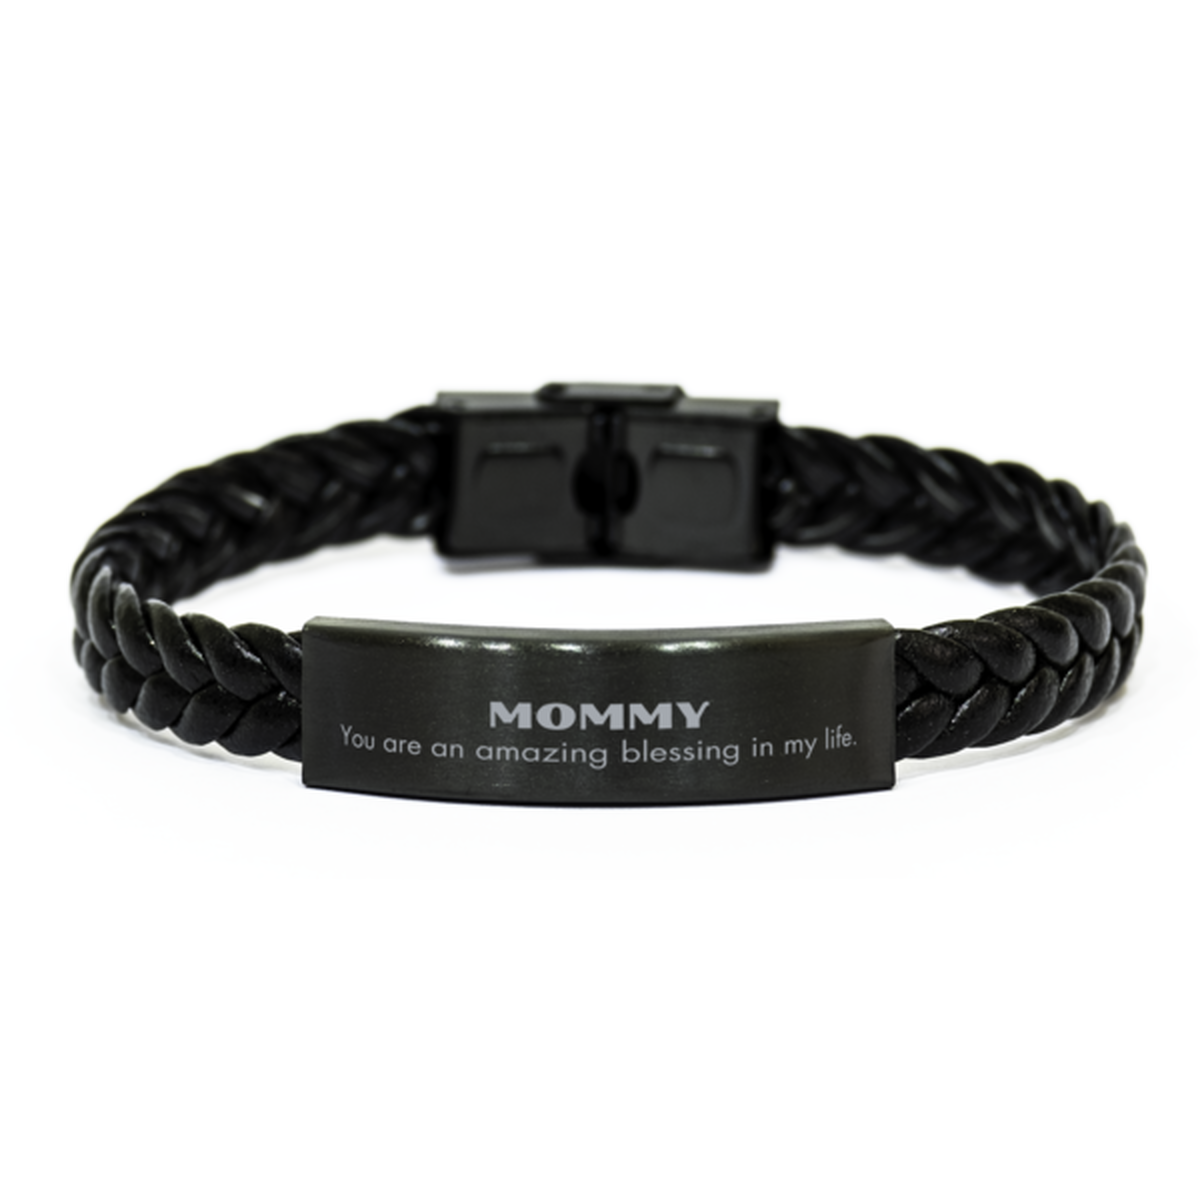 Mommy Braided Leather Bracelet, You are an amazing blessing in my life, Thank You Gifts For Mommy, Inspirational Birthday Christmas Unique Gifts For Mommy